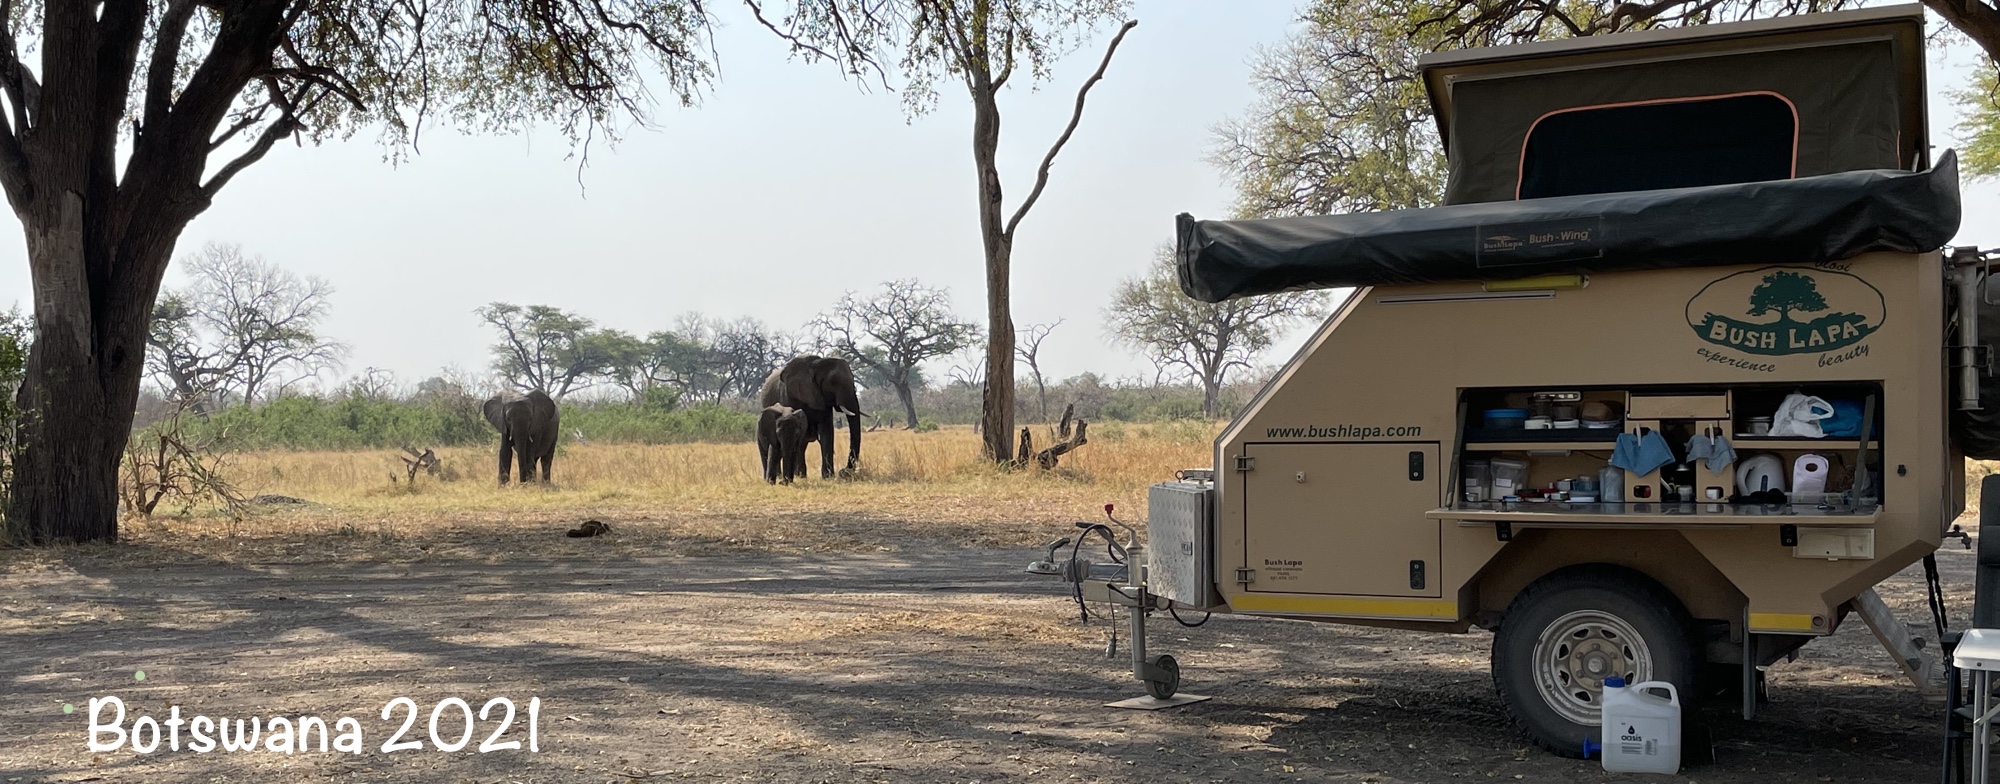 Our campsite in Khwai with 3 elephants behind us.